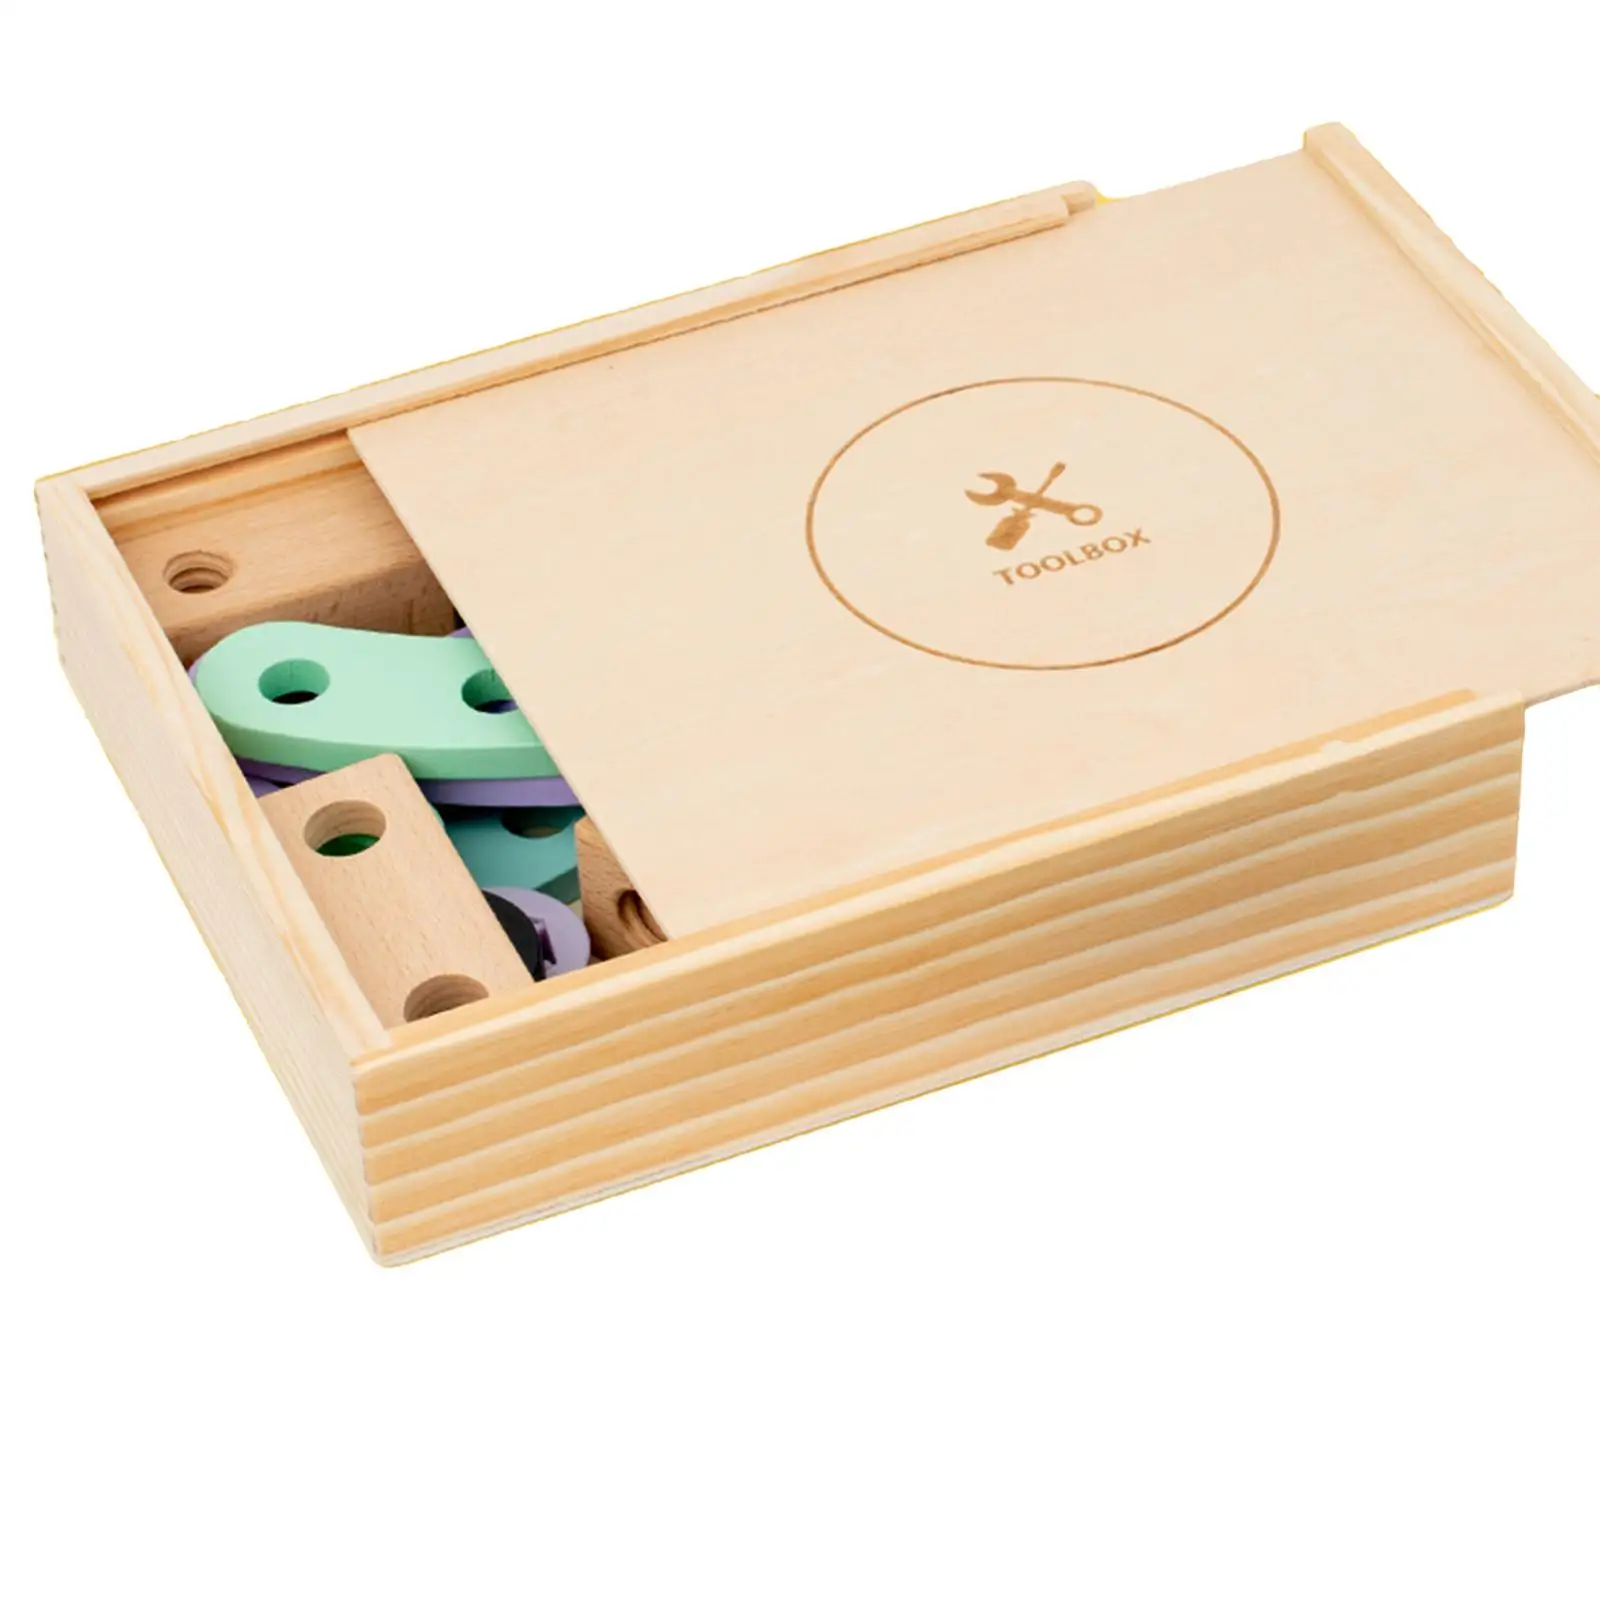 Wooden Repair Tool Box Toy Hand Eye Coordination Multifunctional Nut Screw Disassembly Learning Toy for Baby Children Girls Boys